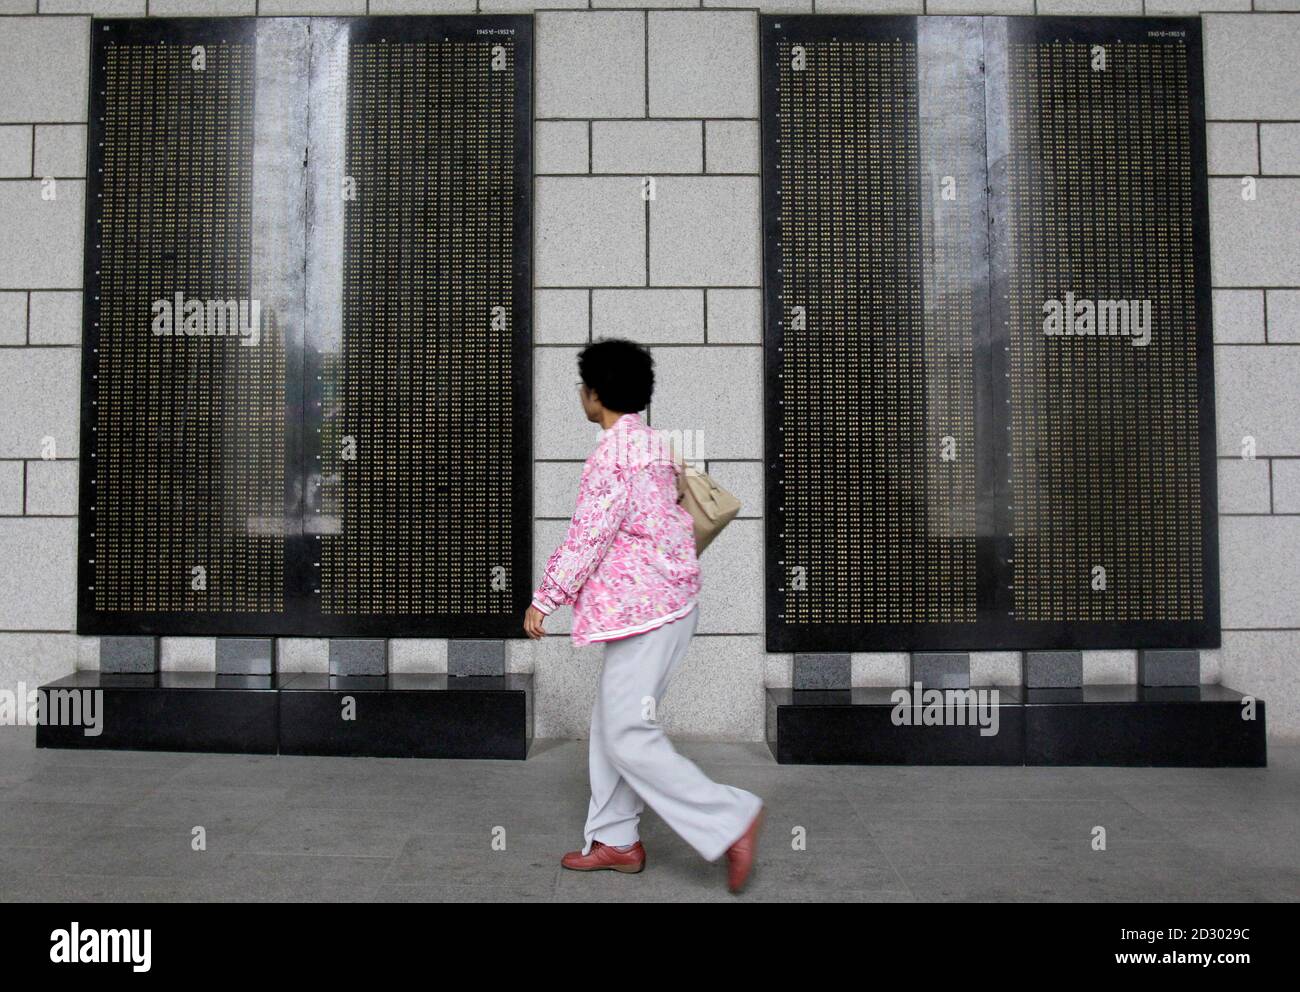 A woman walks past monuments to those killed in action during the 1950-53 Korean War at the Korean War Memorial Museum in Seoul May 23, 2010. The United Nations Command (UNC) has launched an investigation into whether North Korea violated the Korean War armistice by sinking the South's naval corvette Cheonan on March 26, the U.N. body said on Saturday. North Korea denounced the probe as a 'bogus mechanism.'  REUTERS/Jo Yong-Hak (SOUTH KOREA - Tags: POLITICS MILITARY) Stock Photo